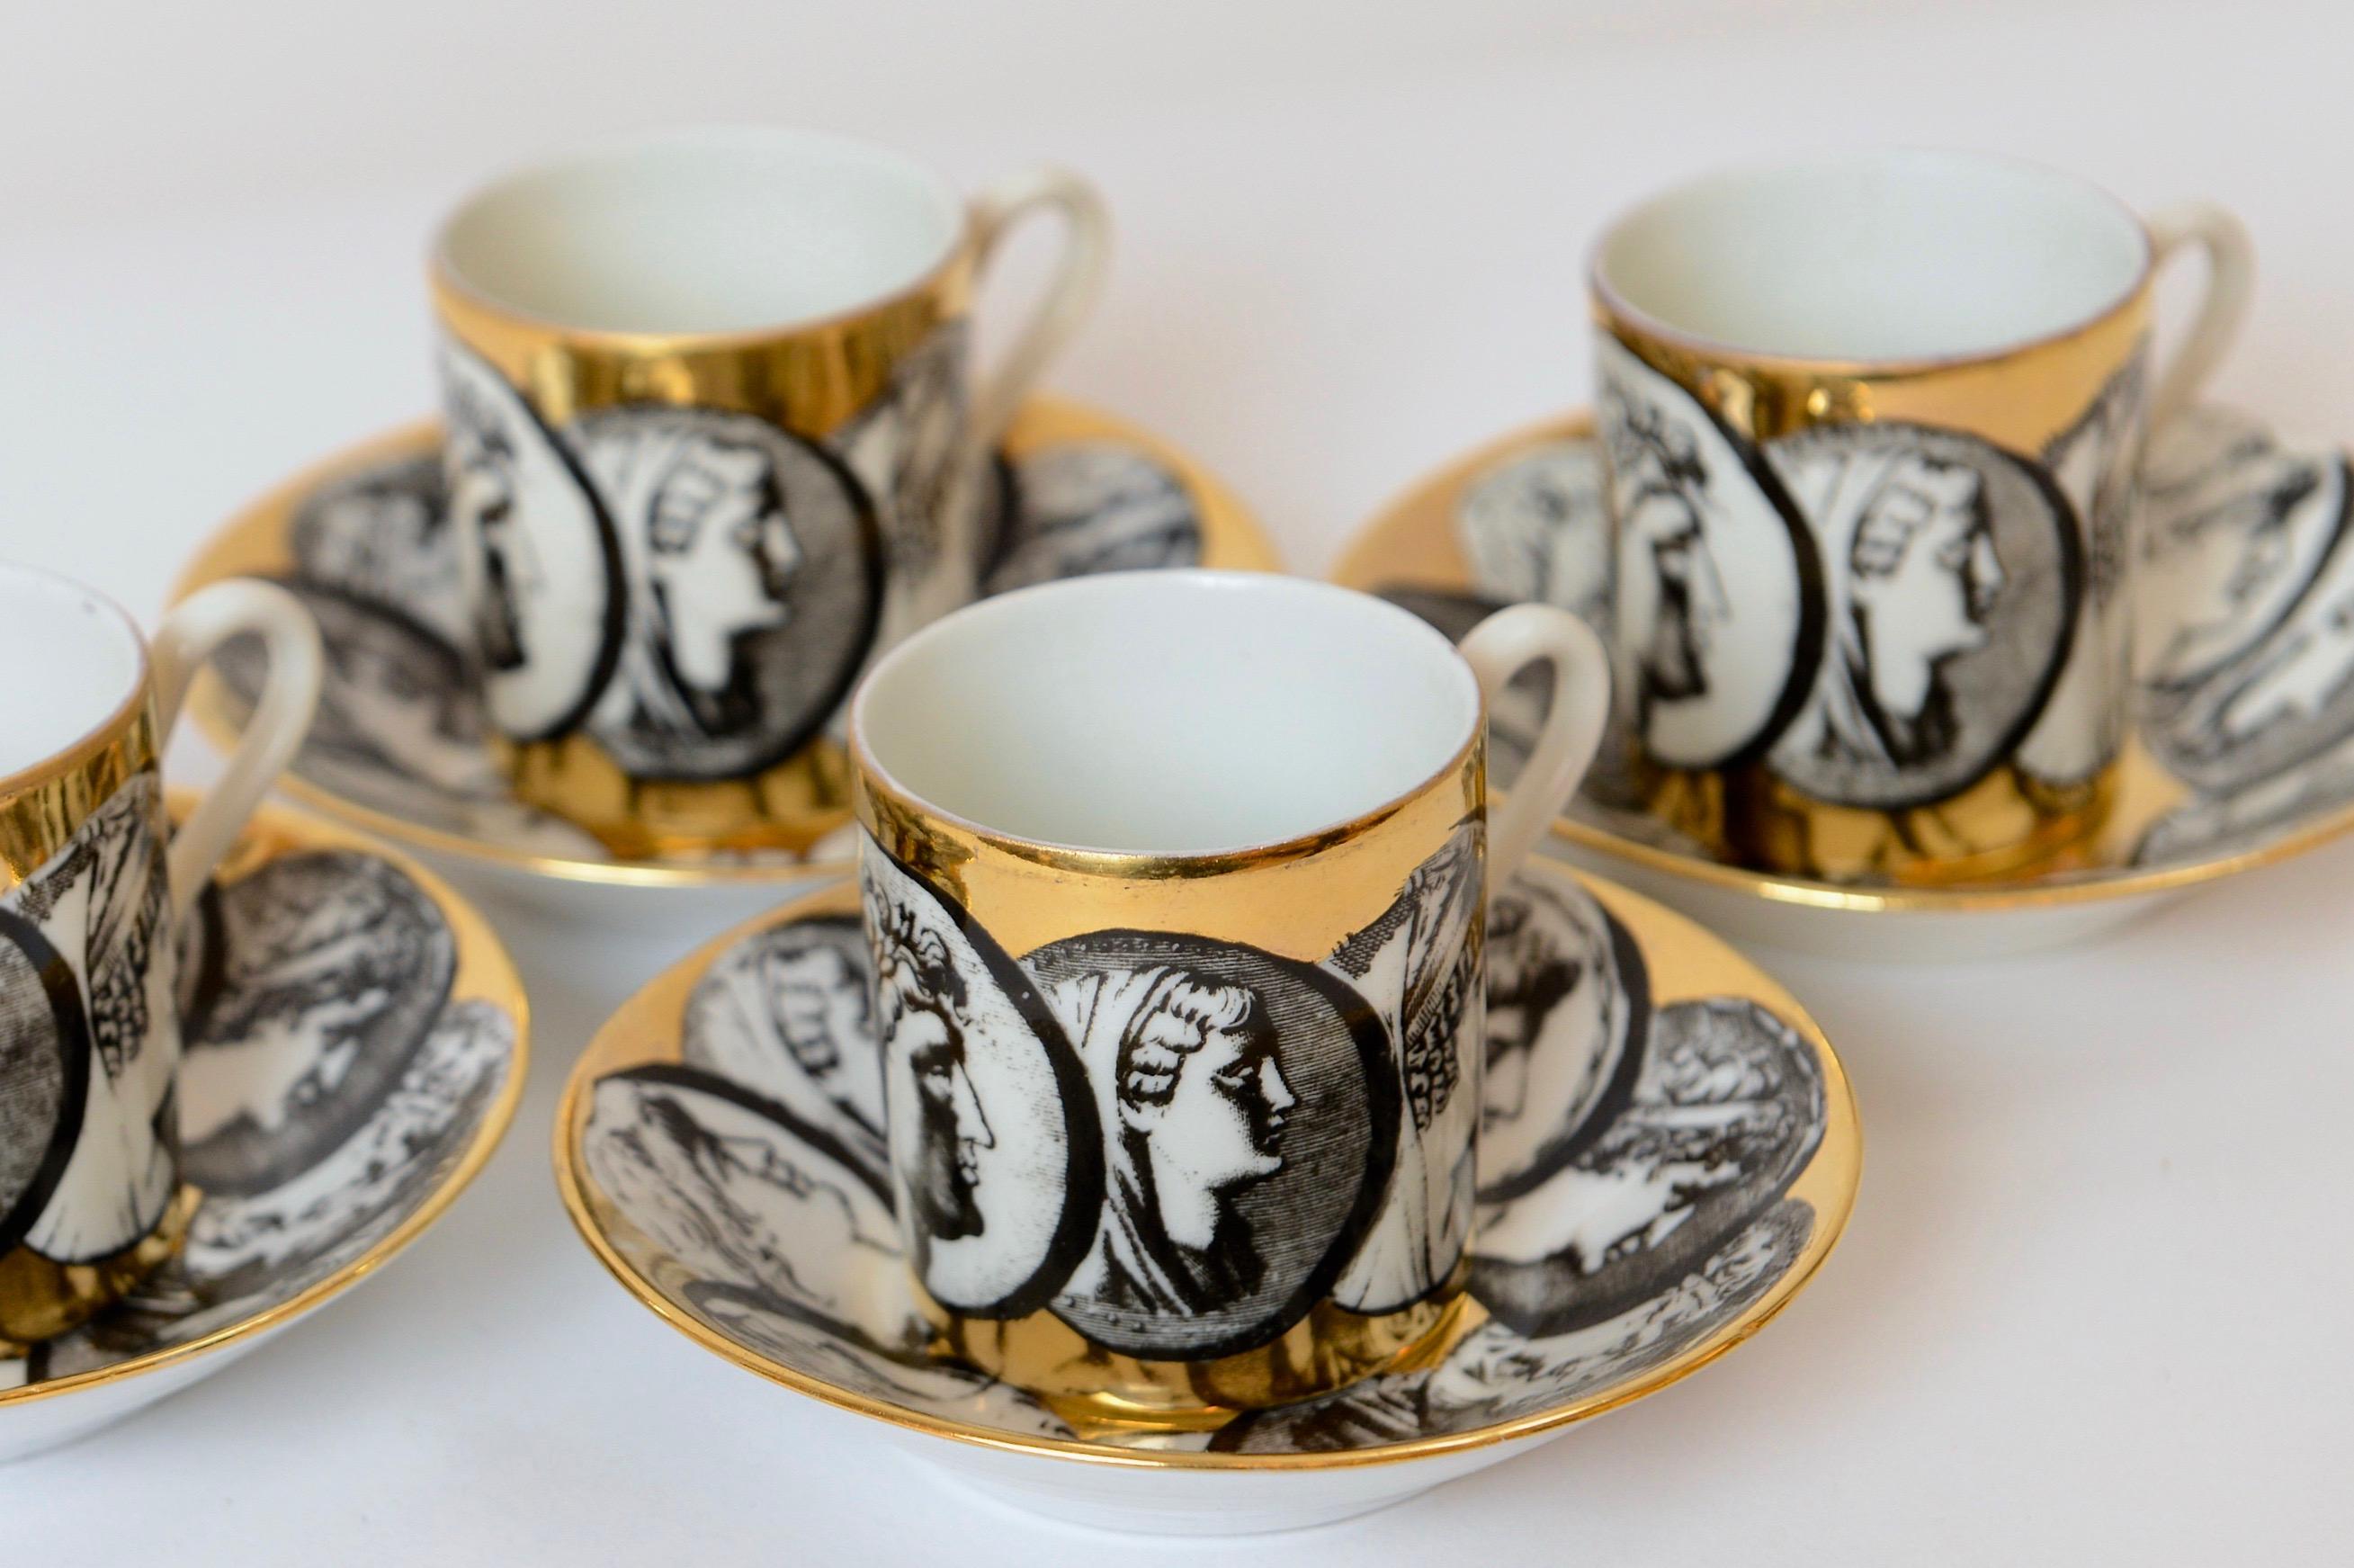 A rare and early set of four espresso cup and saucers designed by Piero Fornasetti, circa 1950. Produced by the historic Italian ceramic company, Richard Ginori, these beautiful porcelain pieces depict Mr Fornasetti’s ‘Cammei’ design of various